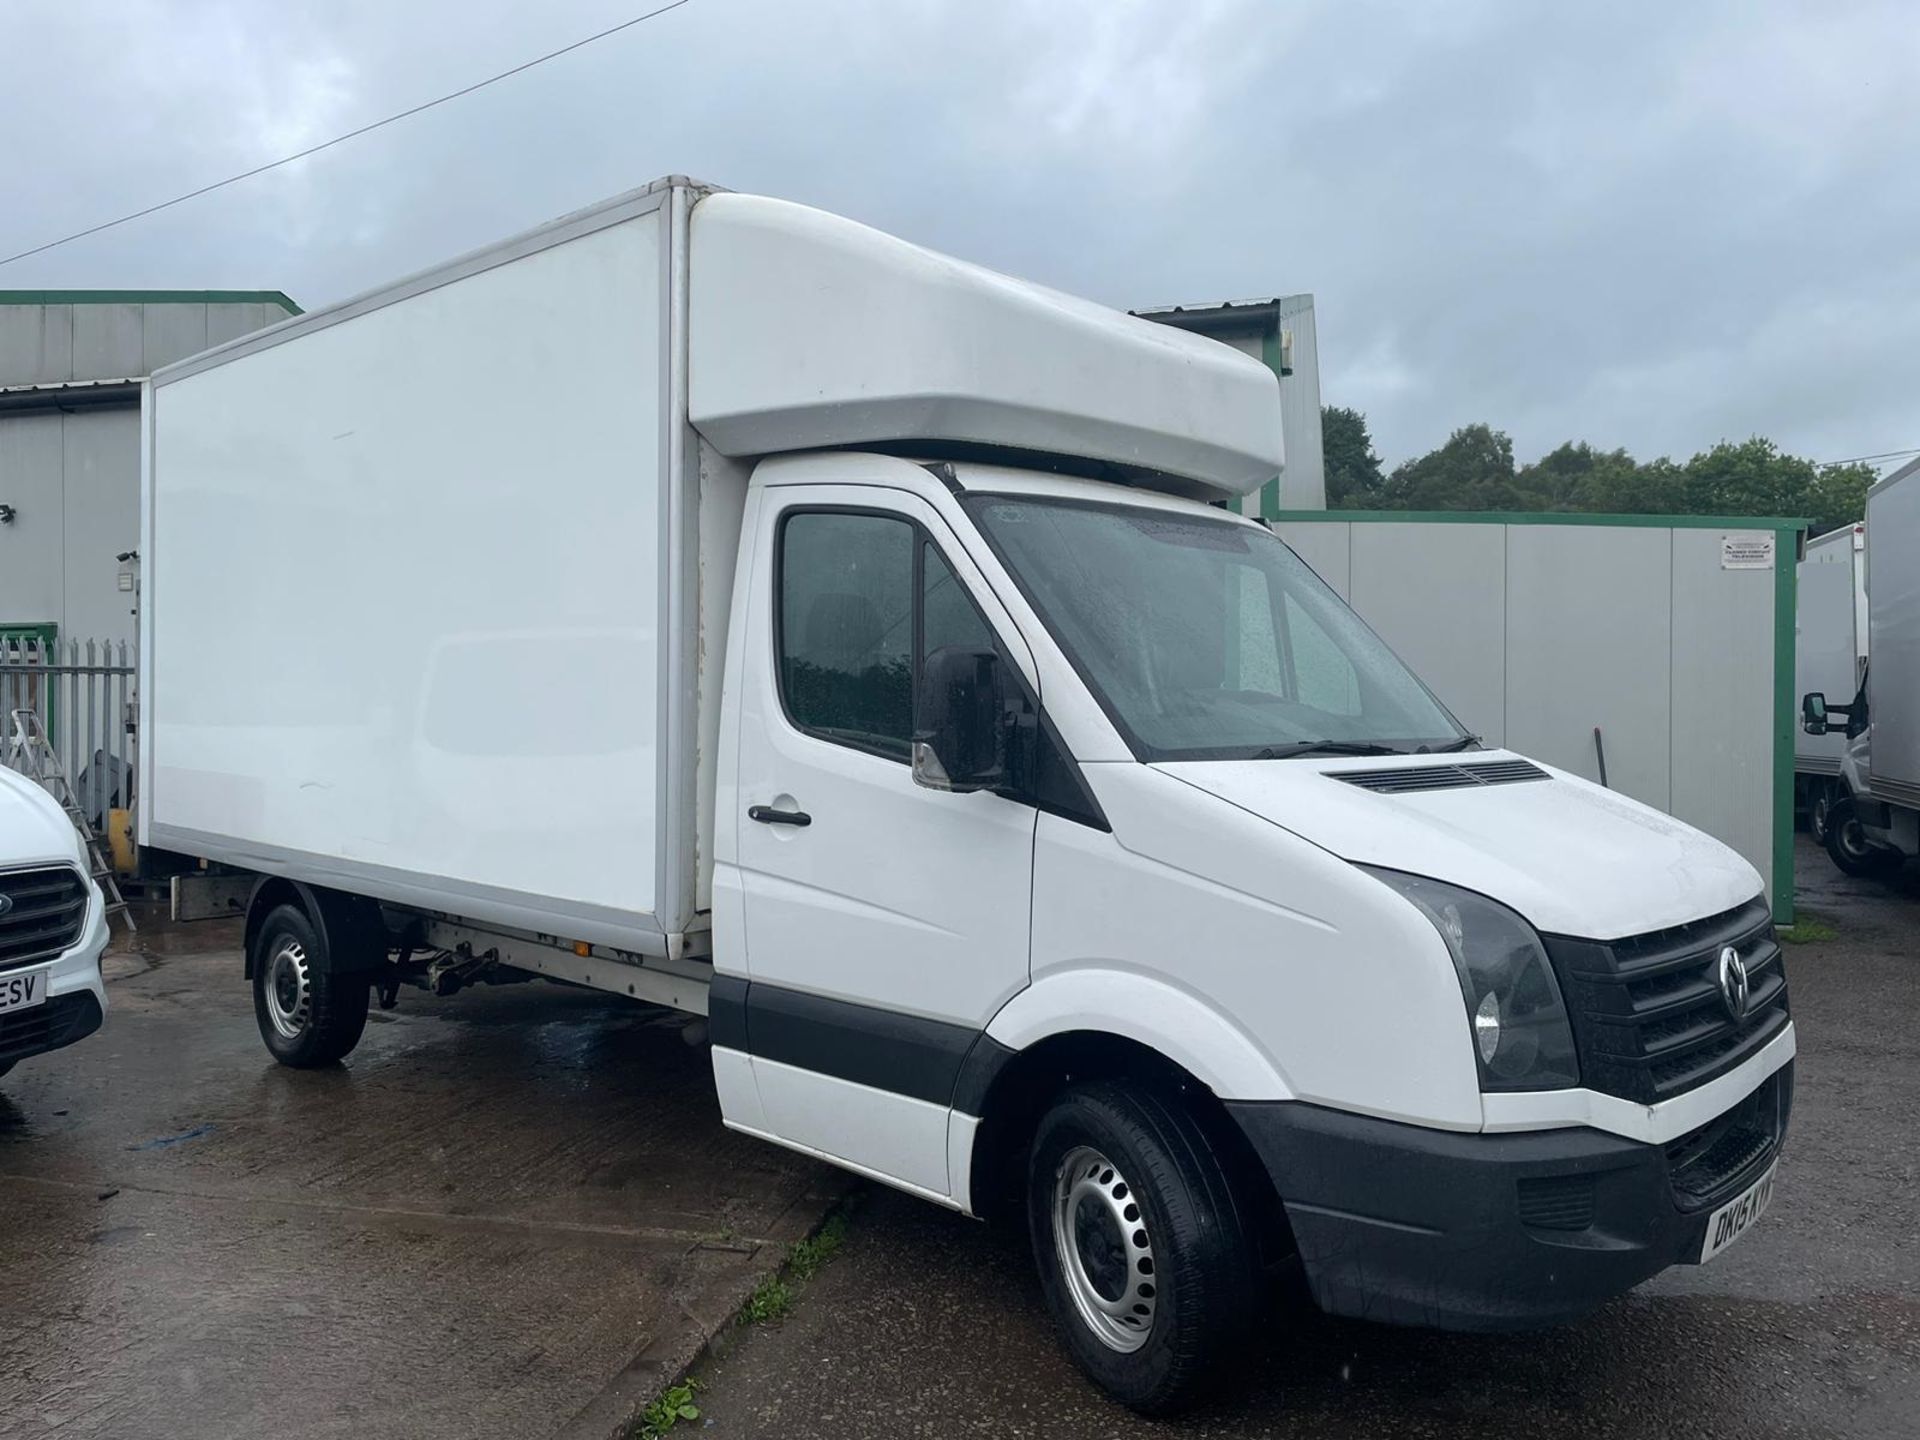 2015 VOLKSWAGEN CRAFTER LUTON VAN WITH TAIL LIFT - 2.0 TDI ENGINE - 144,876 MILES